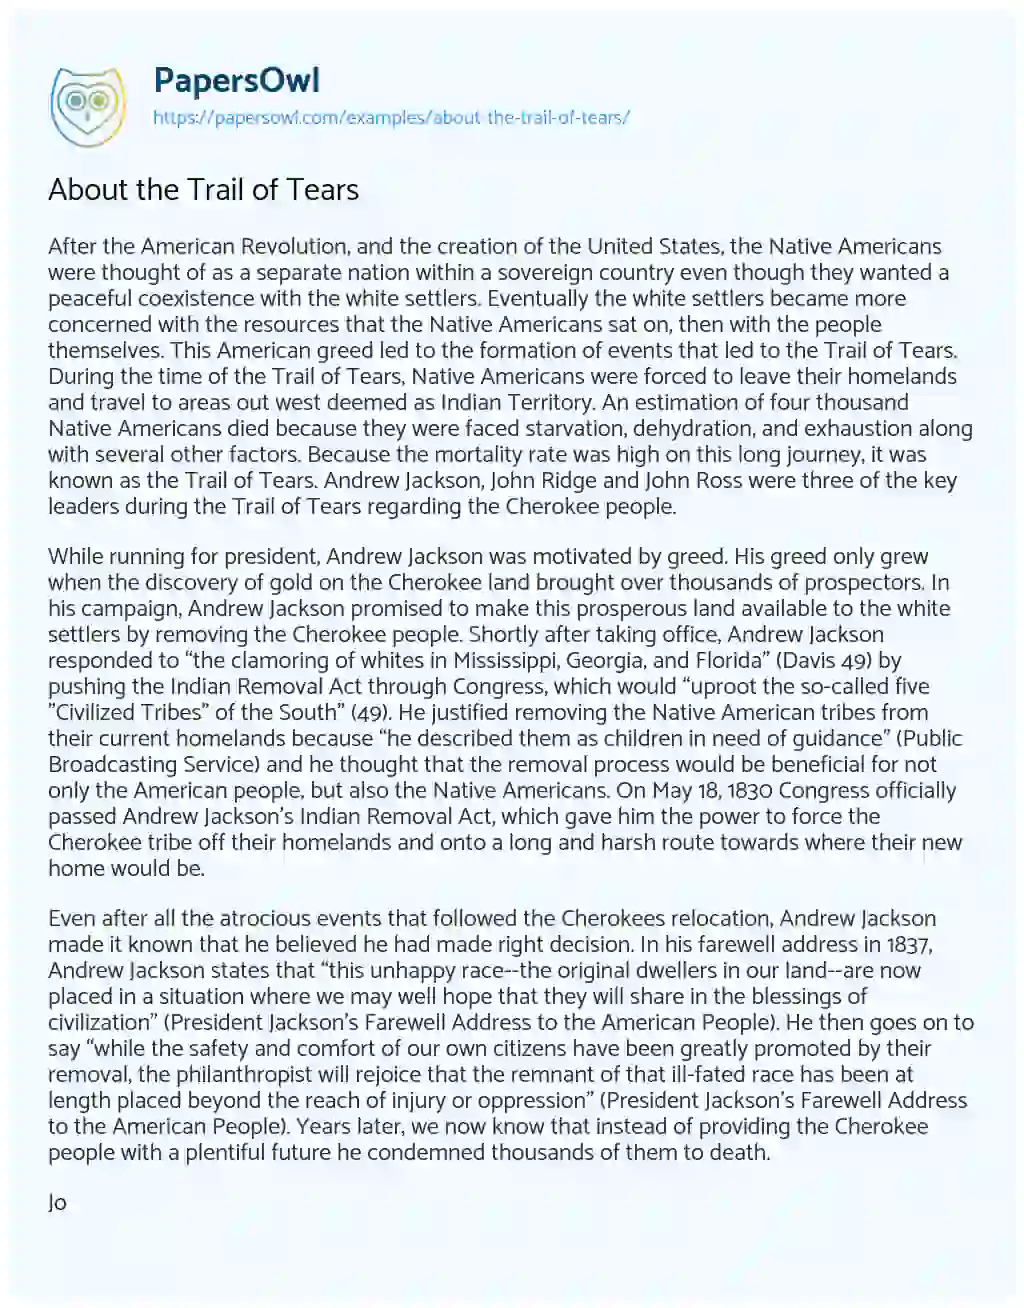 Essay on About the Trail of Tears